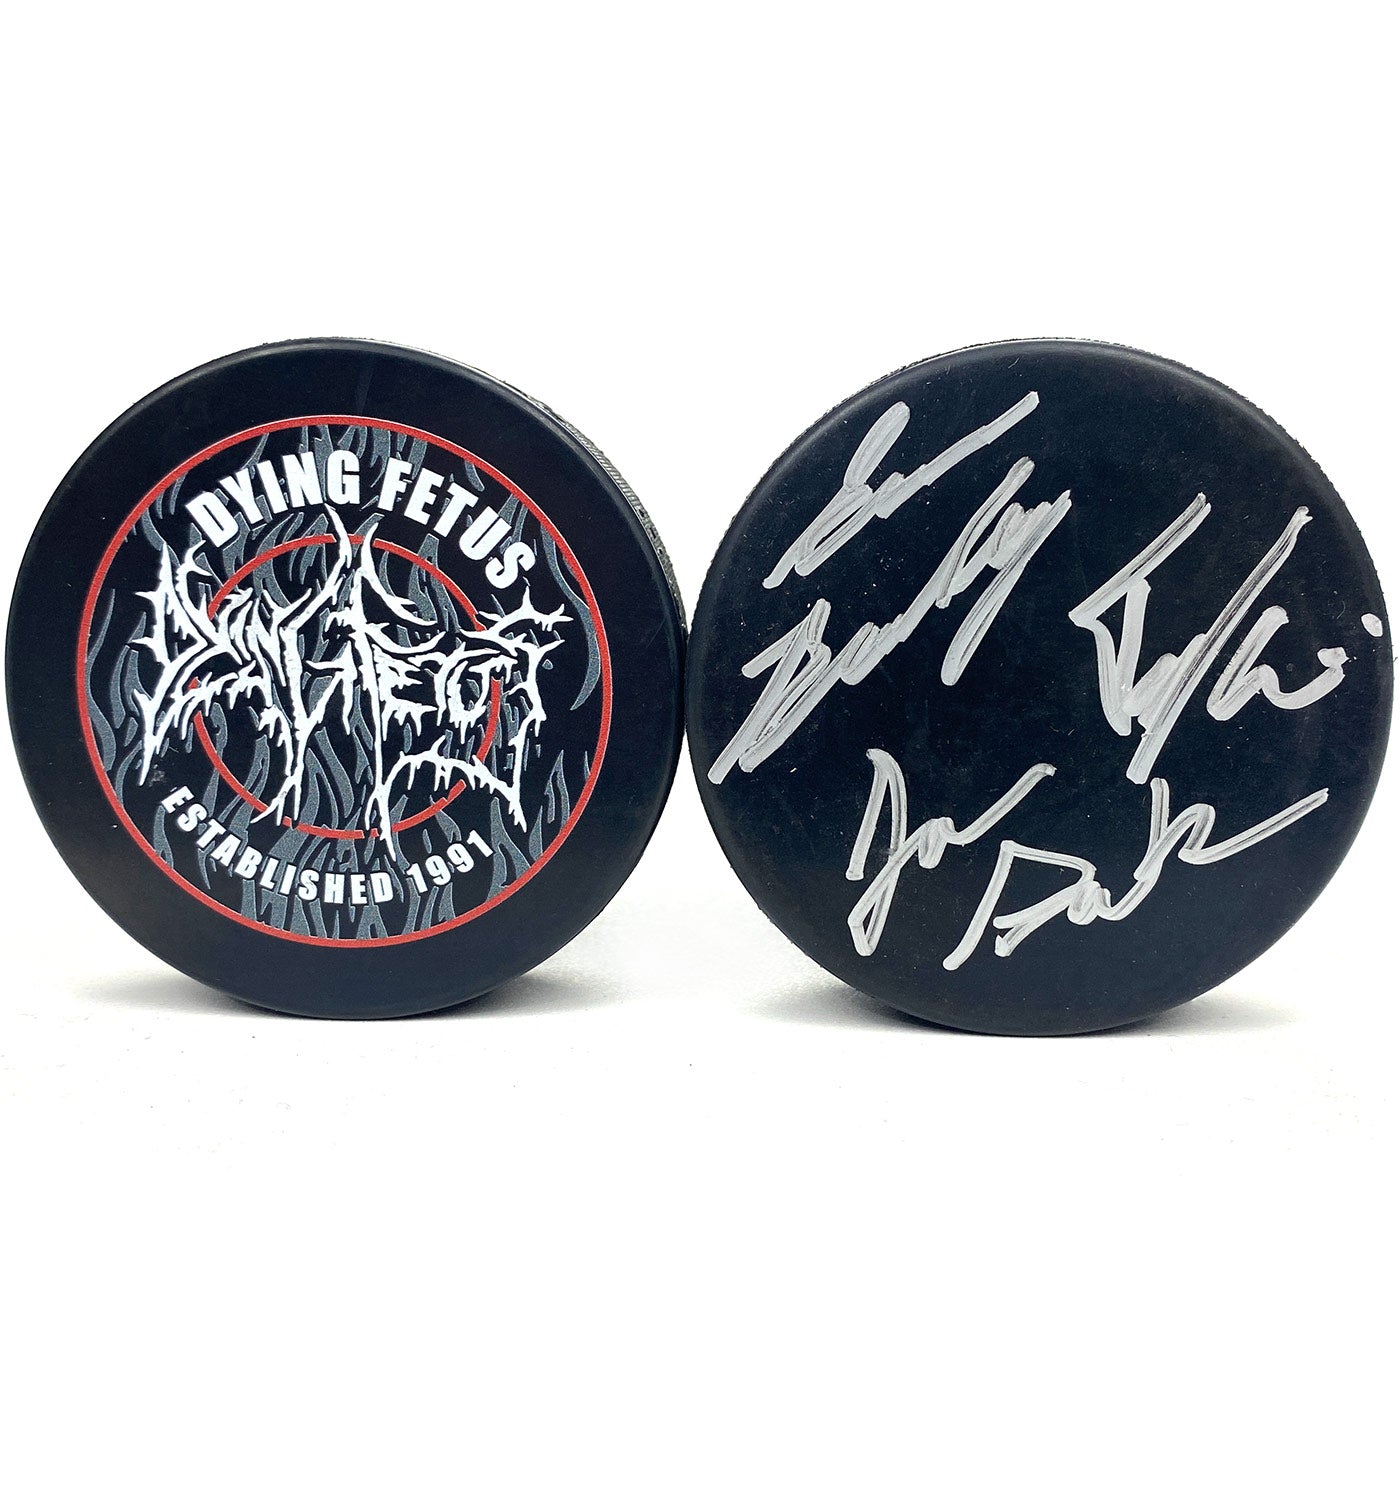 DYING FETUS 'DOUBLE LOGO' limited edition autographed hockey puck